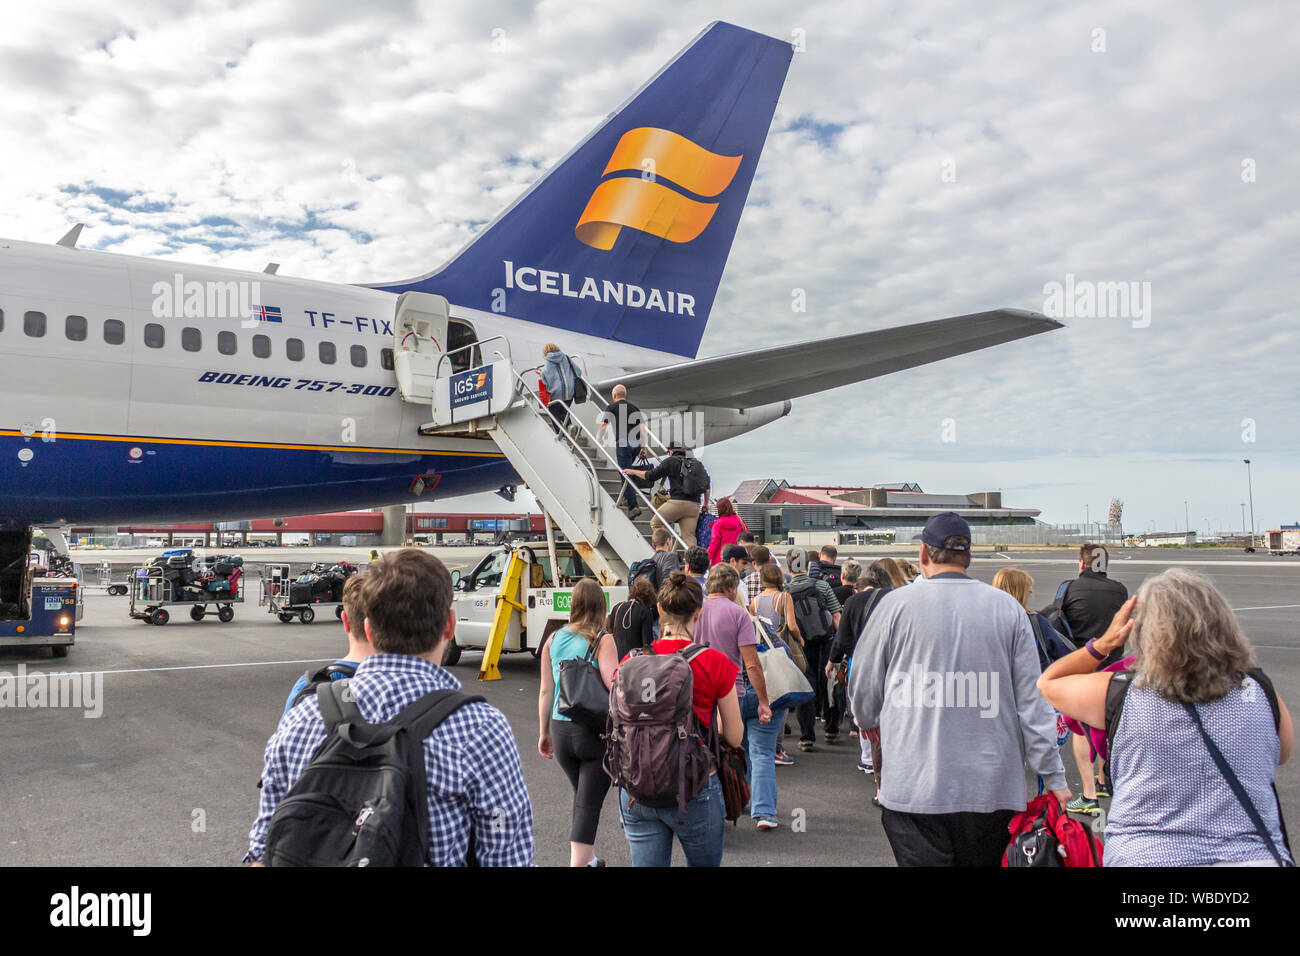 Airline passengers boarding a commercial jet on the tarmac in Iceland for a vacation or a trip home. Stock Photo